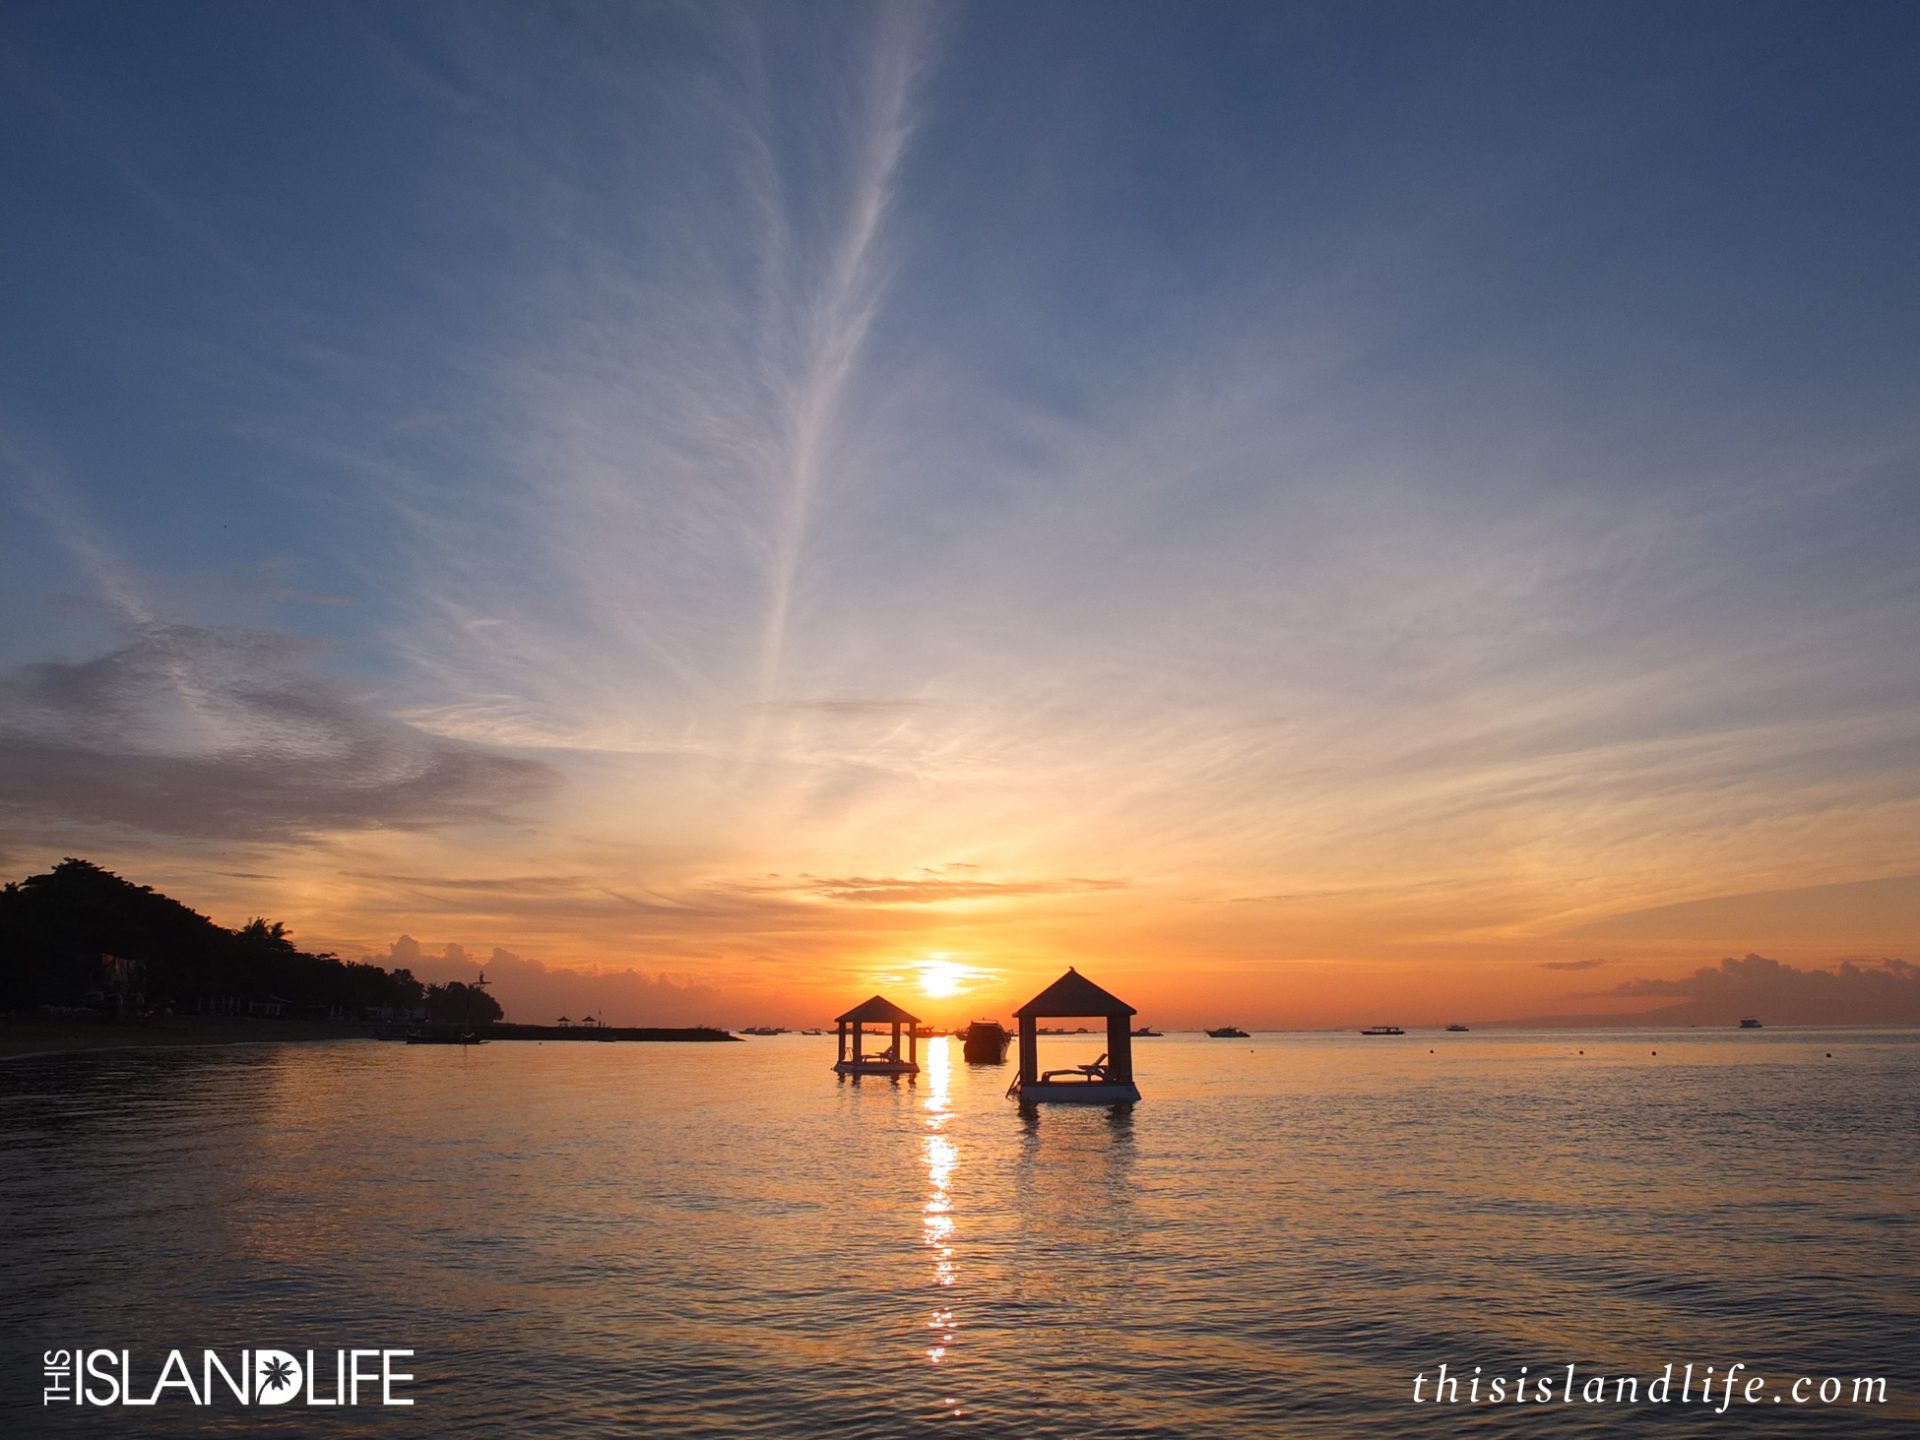 THIS ISLAND LIFE | Sanur Beach | The four best places to watch the sunrise in Bali, Indonesia